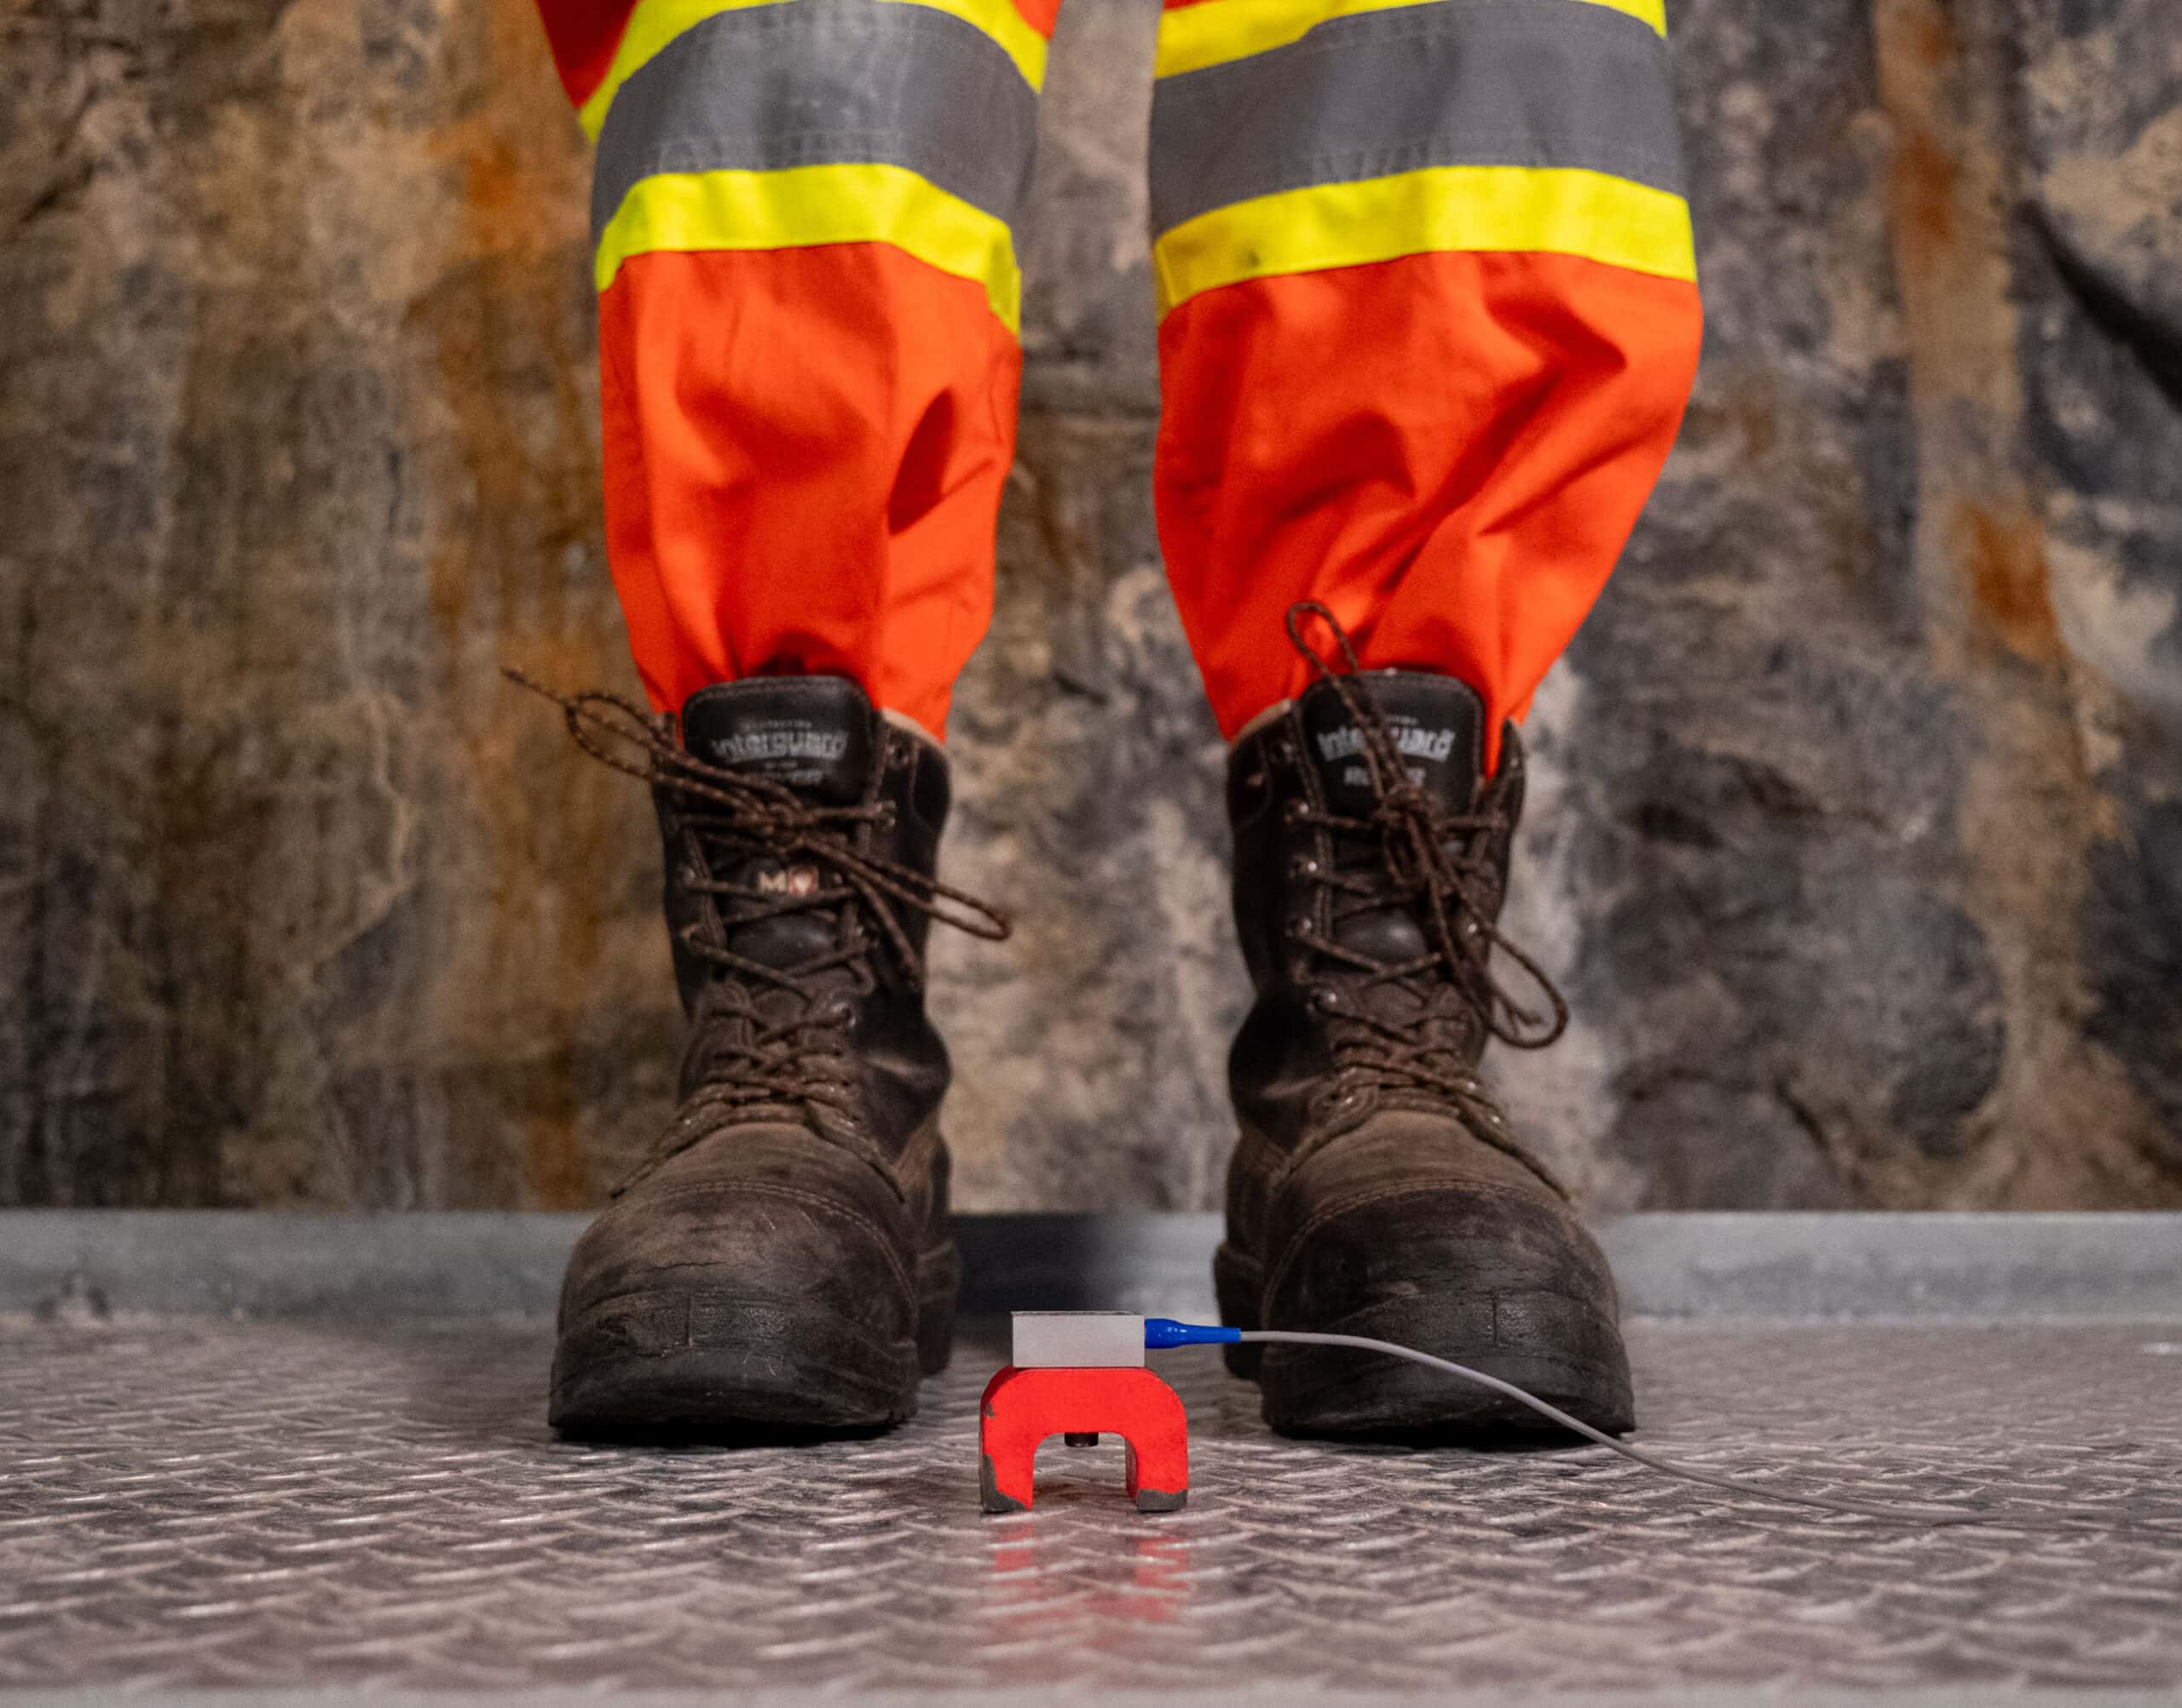 Accelerometer and boots on a metal surface in a mine